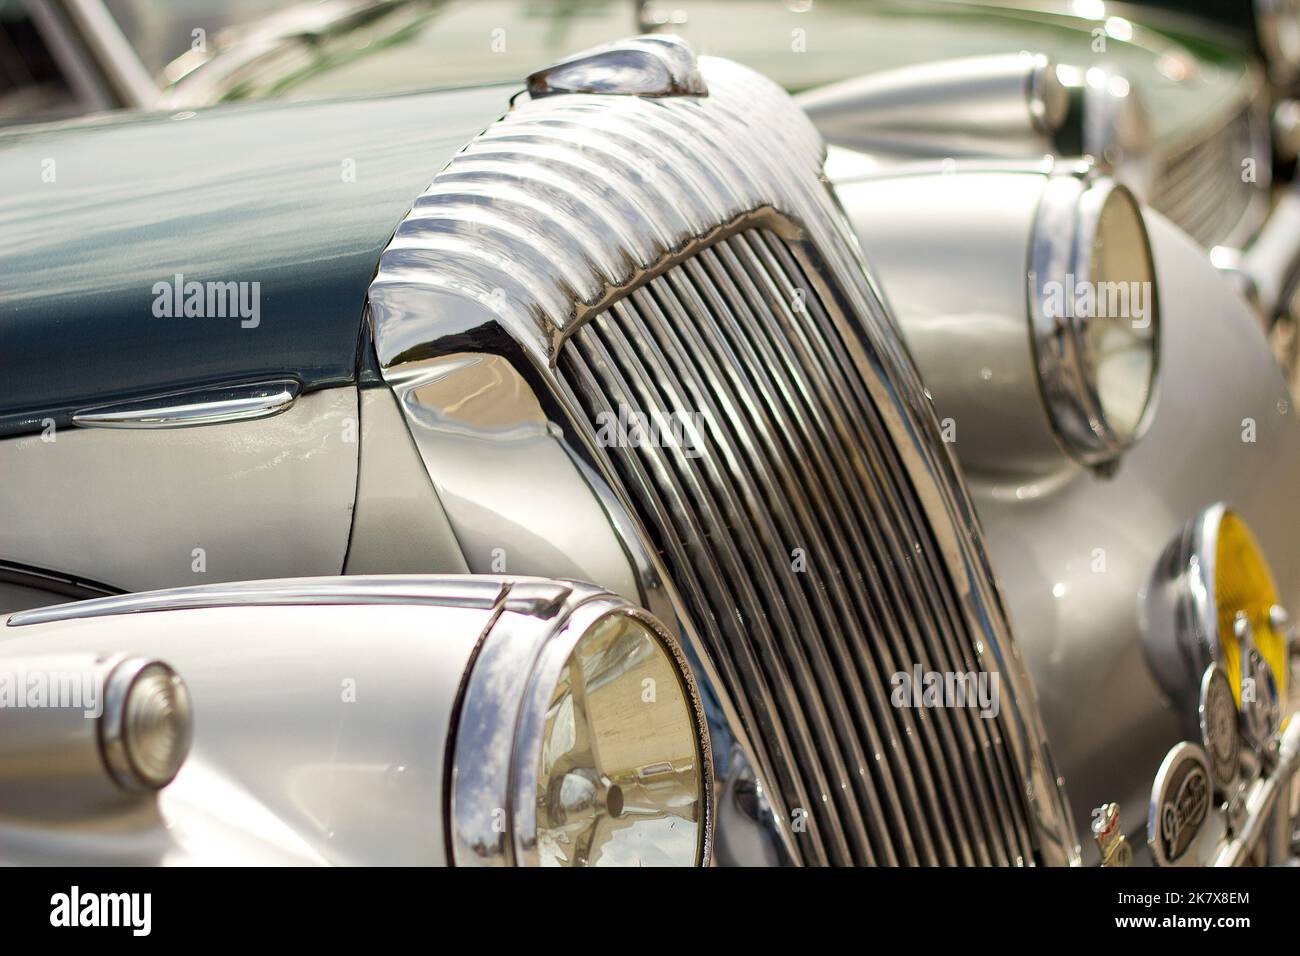 1952 Daimler barker special sport grille detail at a classic car show. Stock Photo